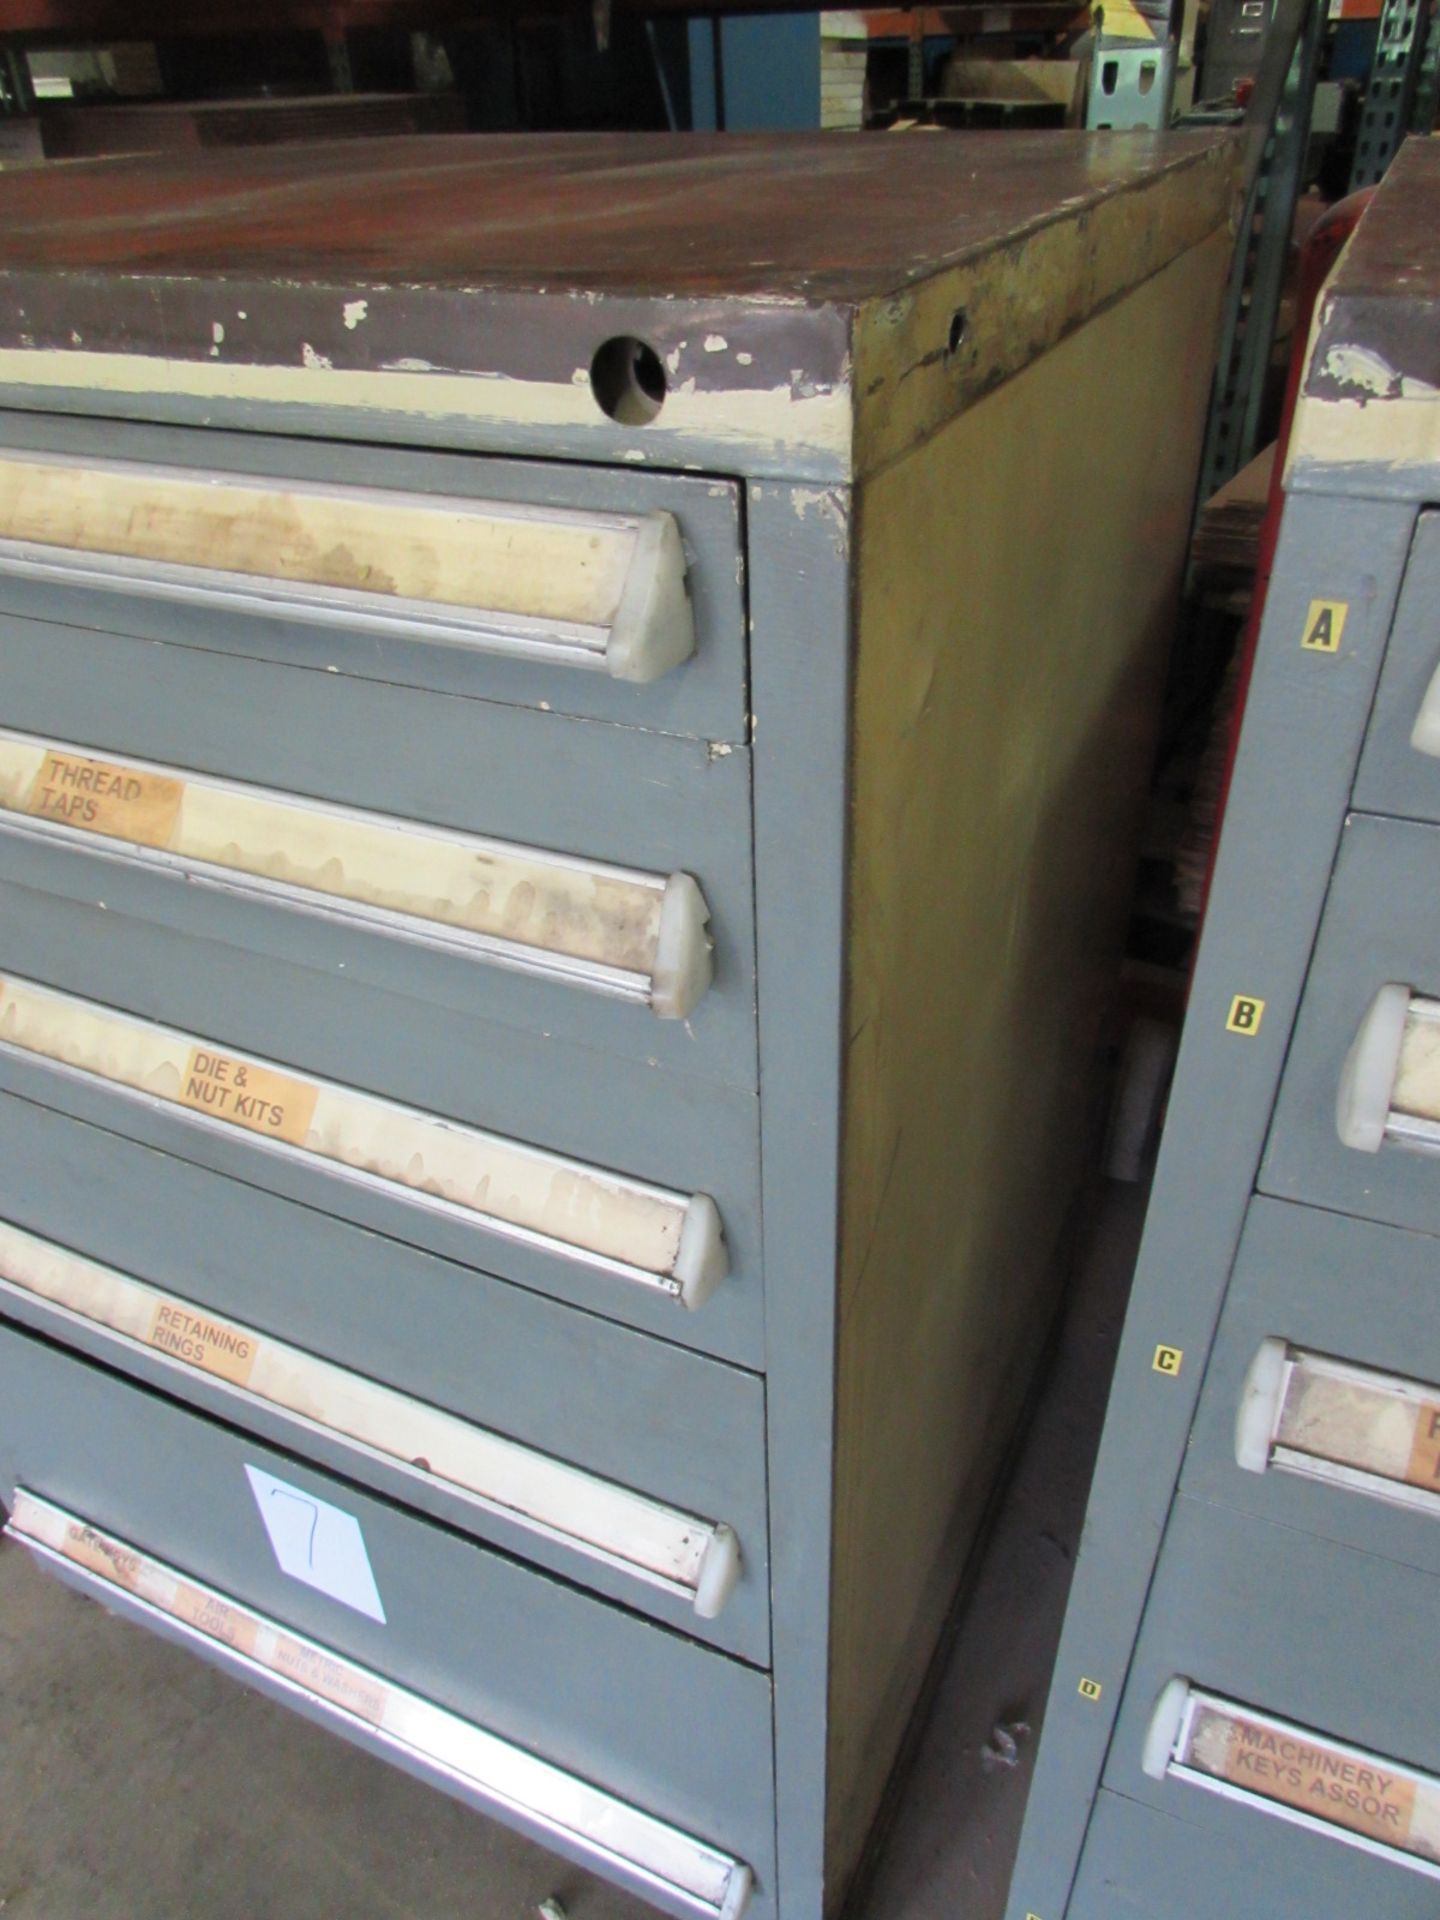 5 Drawer Industrial Cabinet w/Dividers - Image 3 of 6